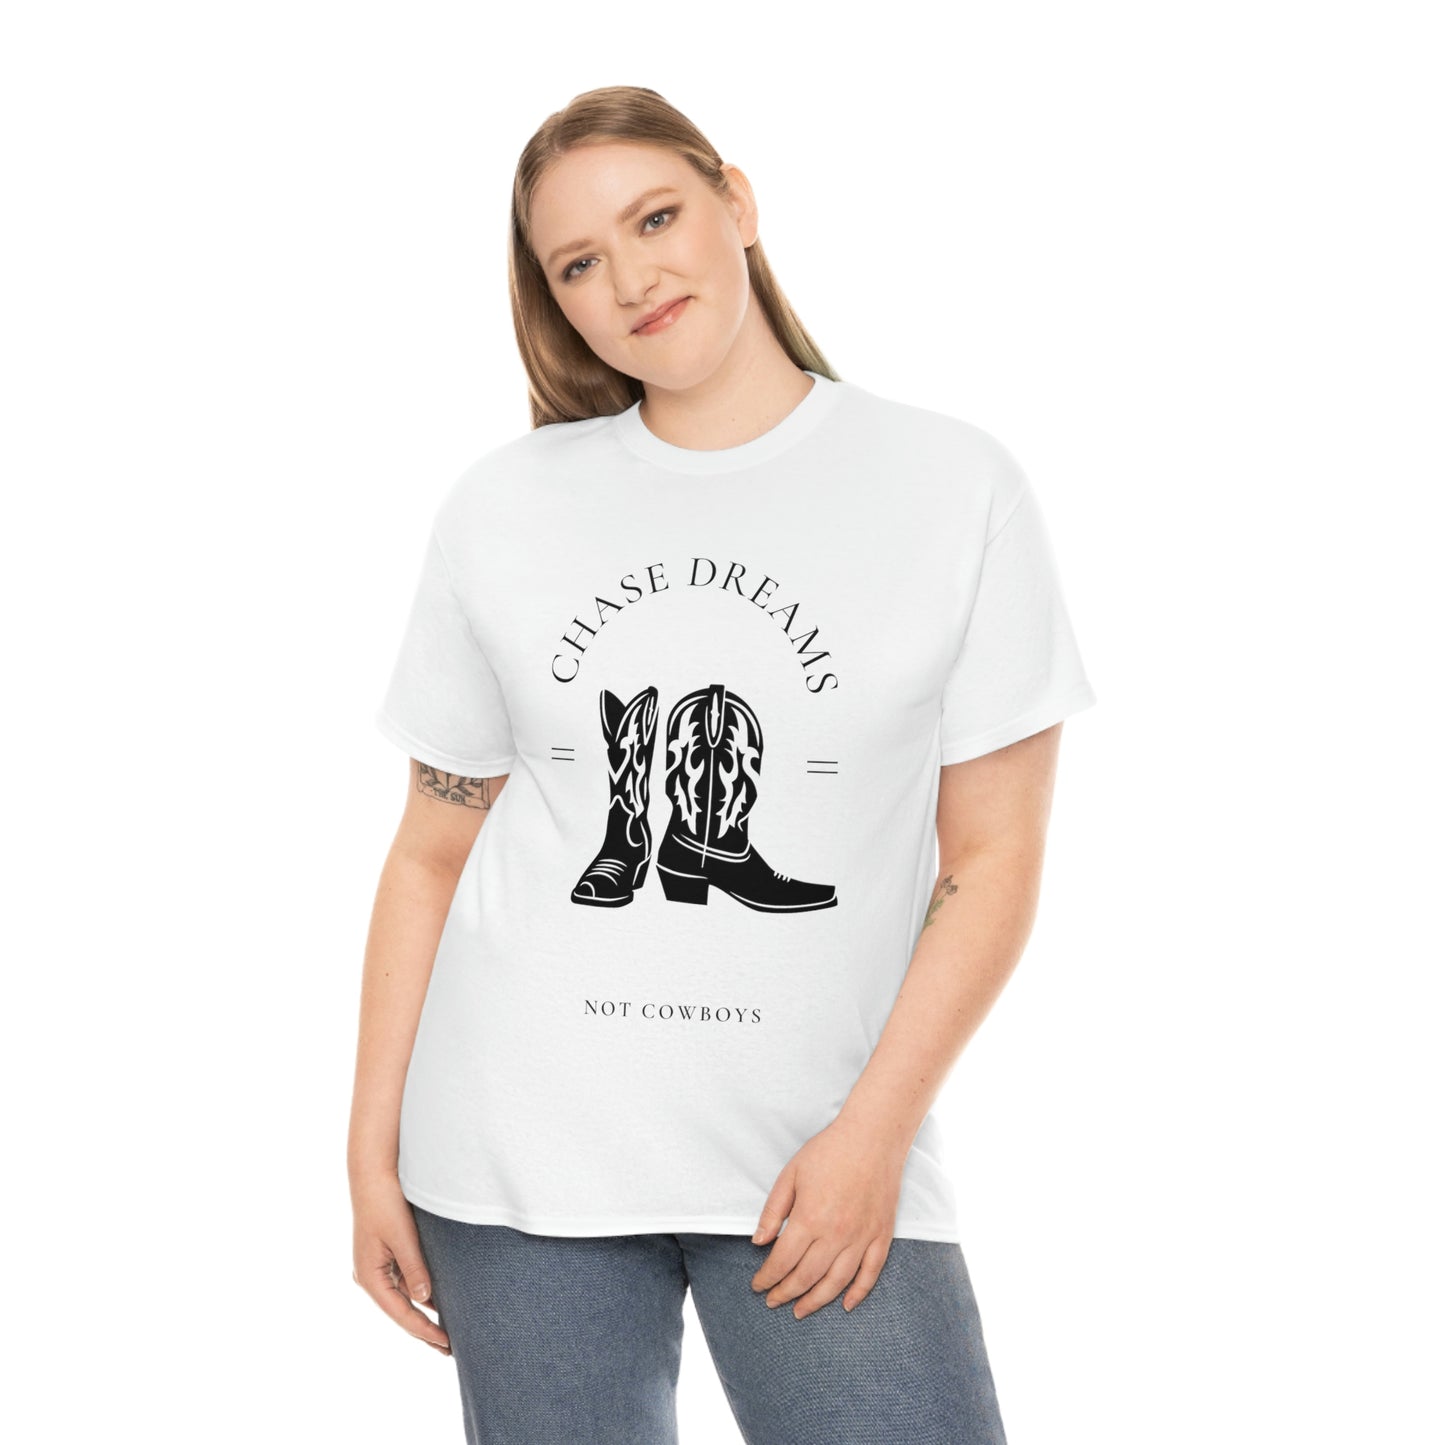 Chase Dreams and Boots Graphic Tee